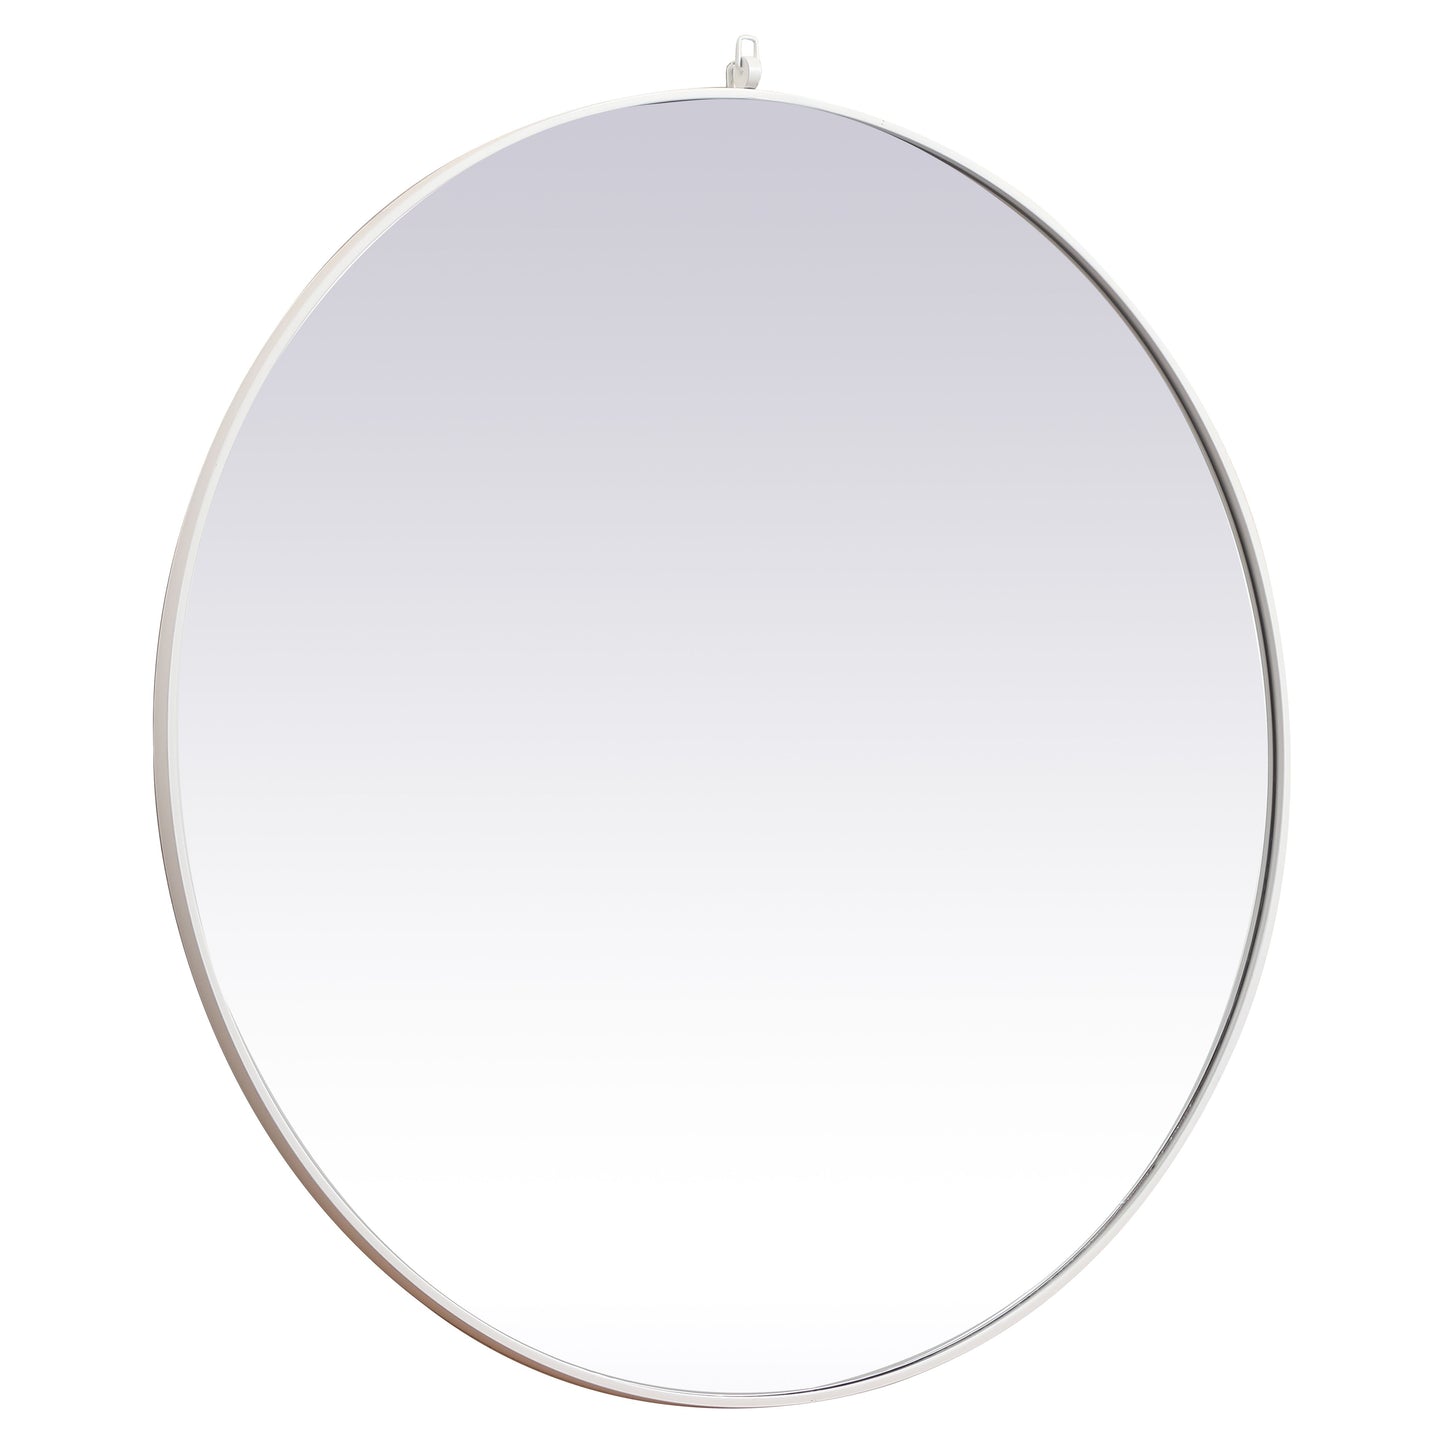 MR4745WH Rowan 45" x 45" Metal Framed Round Mirror with Decorative Hook in White